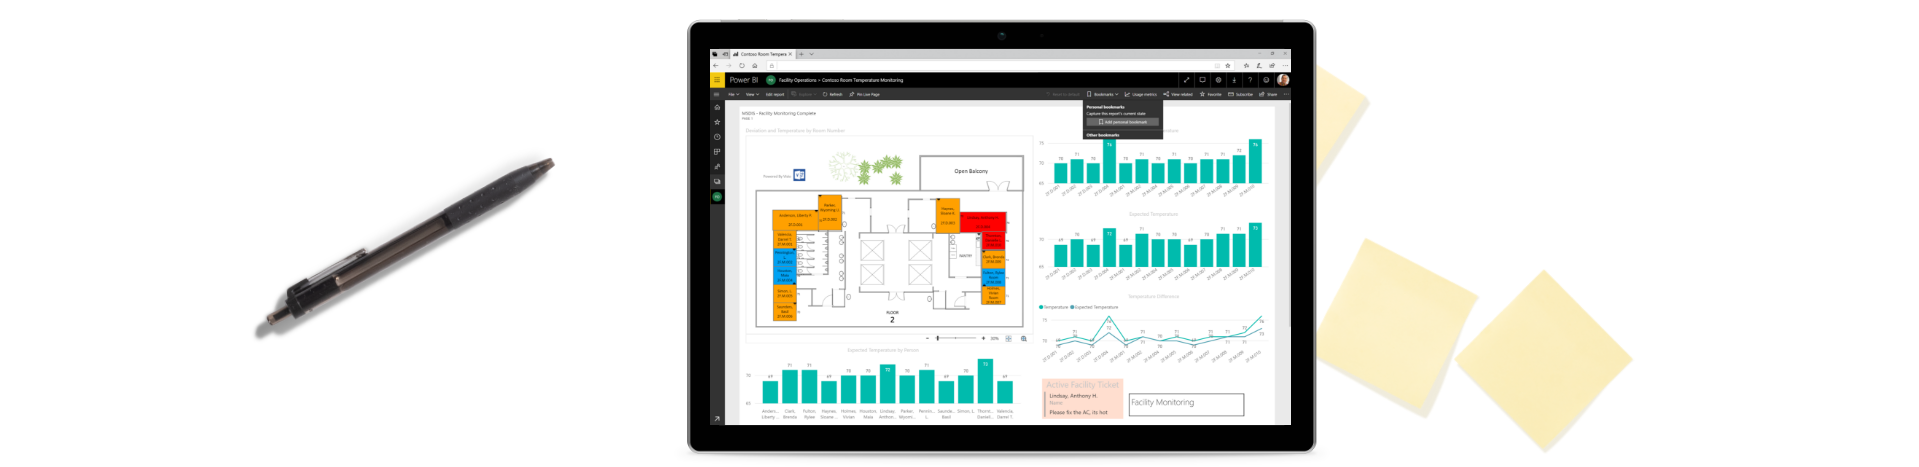 Sticky notes, a pen and a tablet device showing a Power BI dashboard.